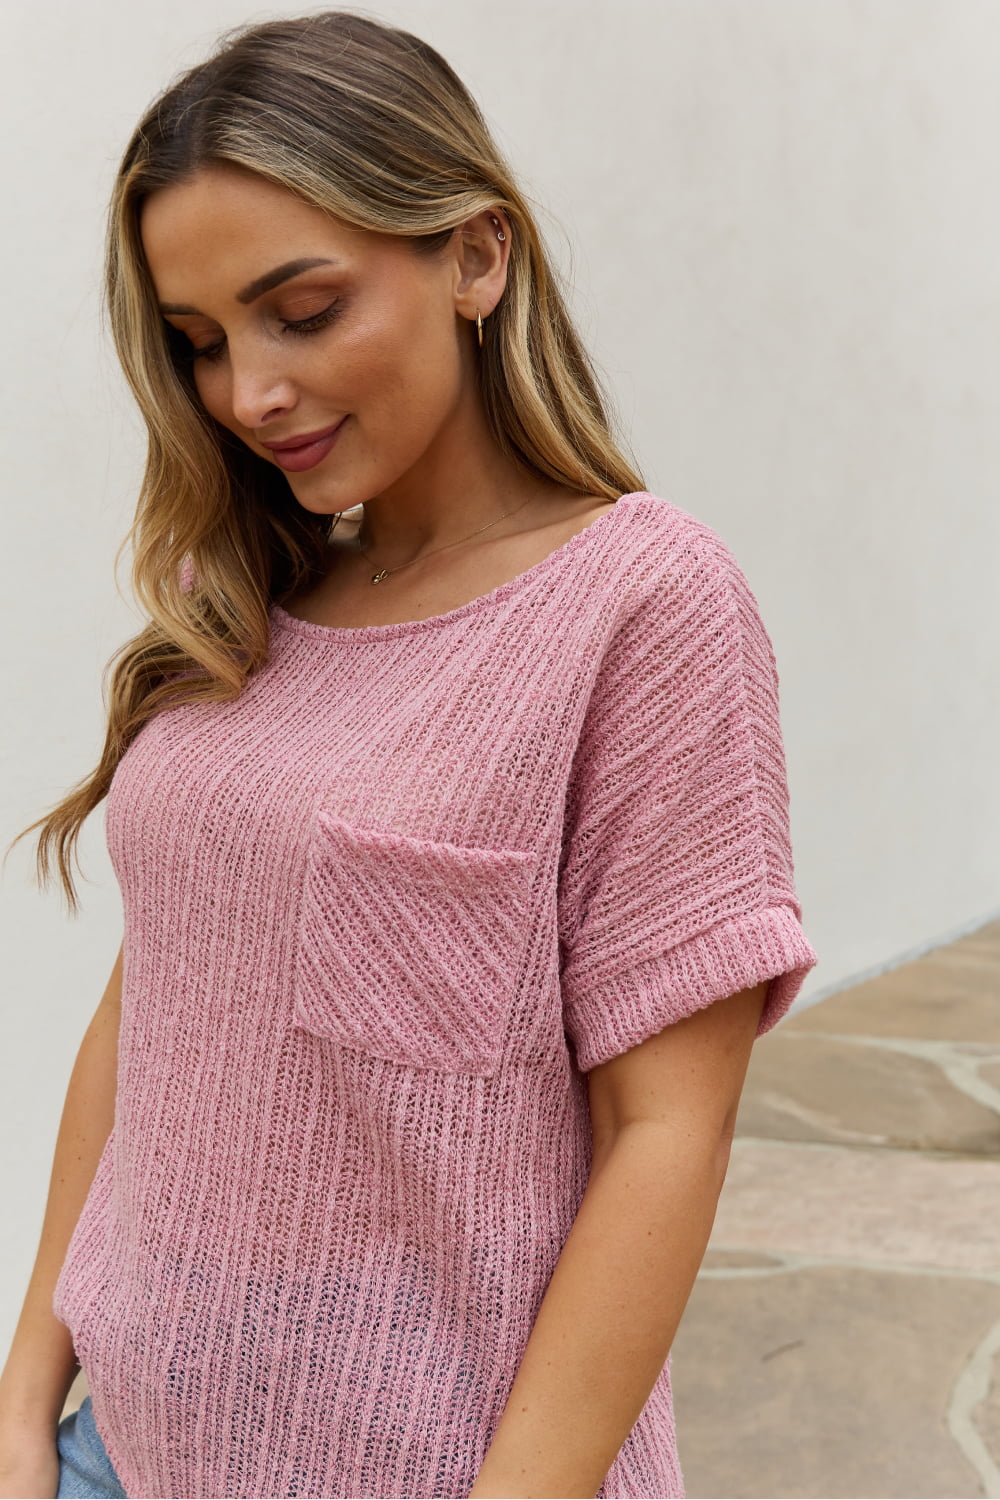 Chunky Knit Short Sleeve Top in Mauve - Camis & Tops - Shirts & Tops - 6 - 2024